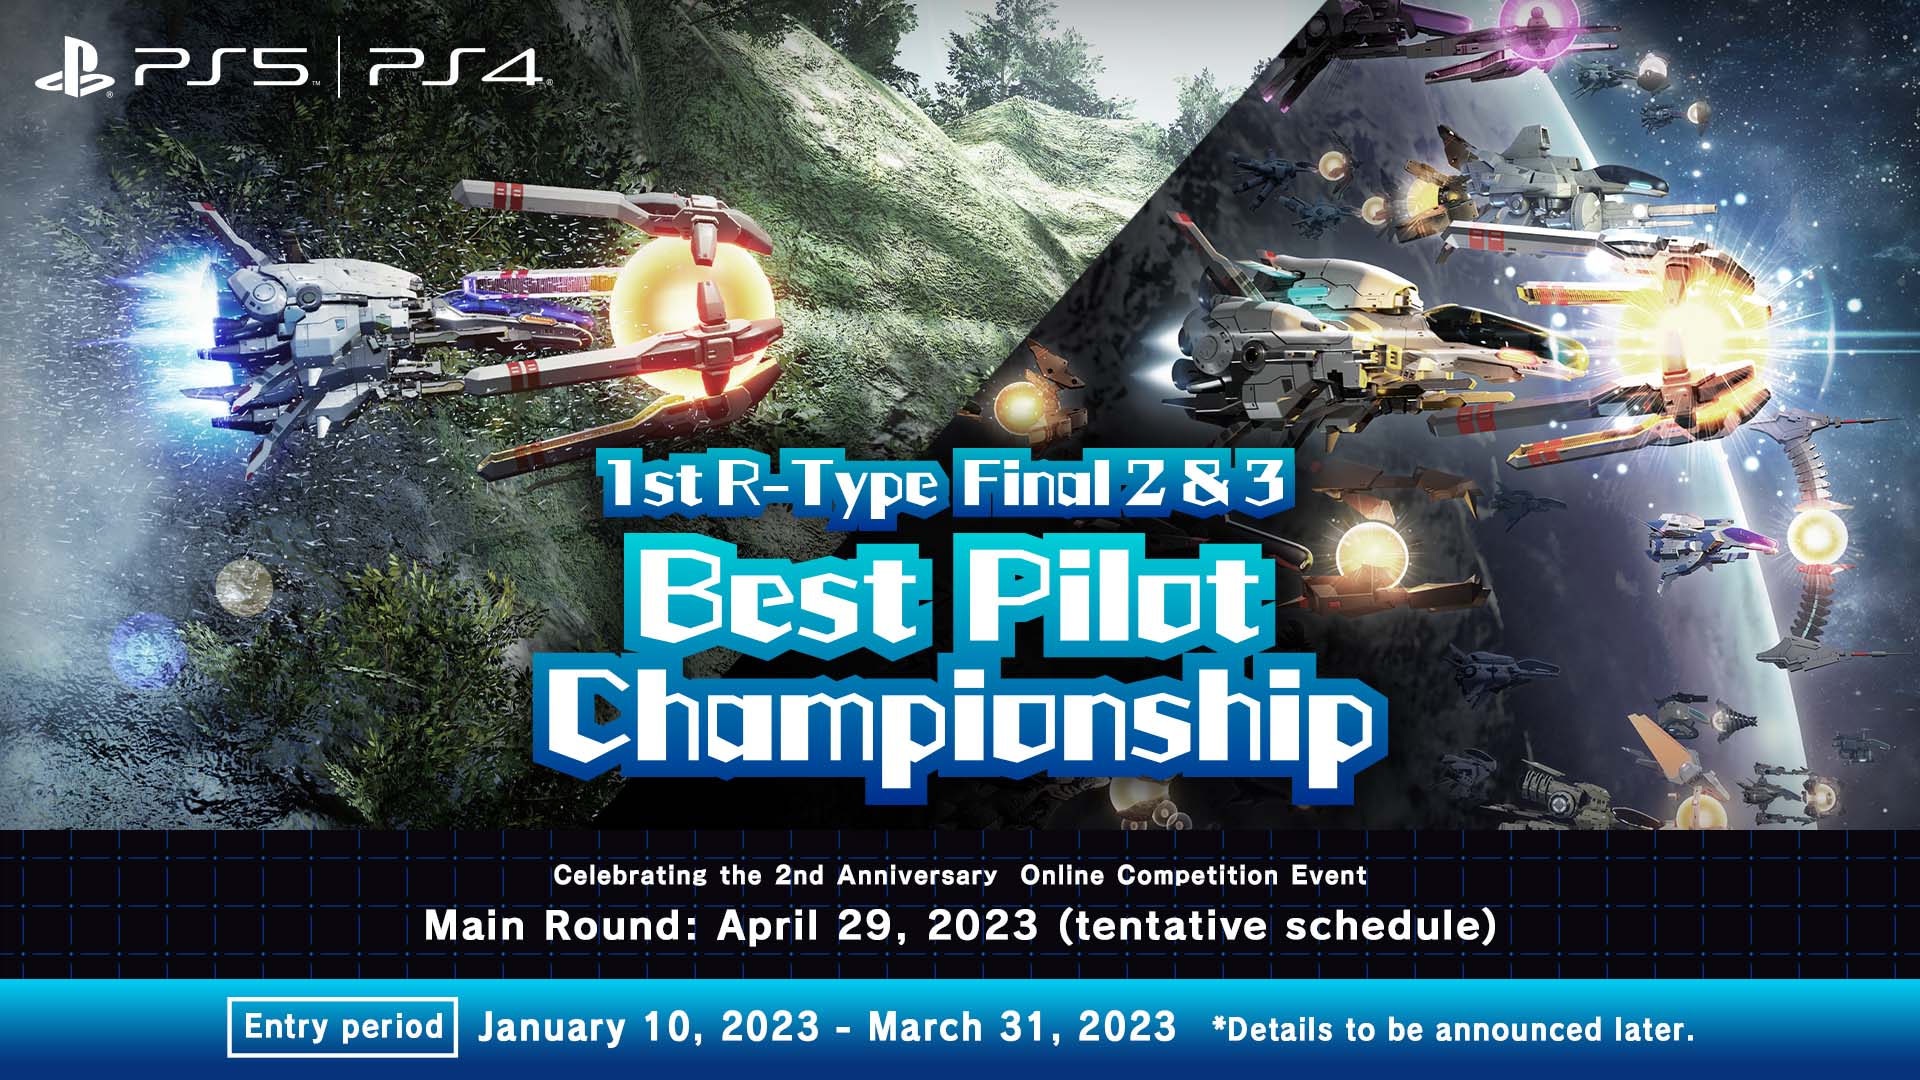 R-Type Final 2 Second Anniversary Online Competition Announcing the "1st R-Type Final 2 & 3 Best Pilot Championship"